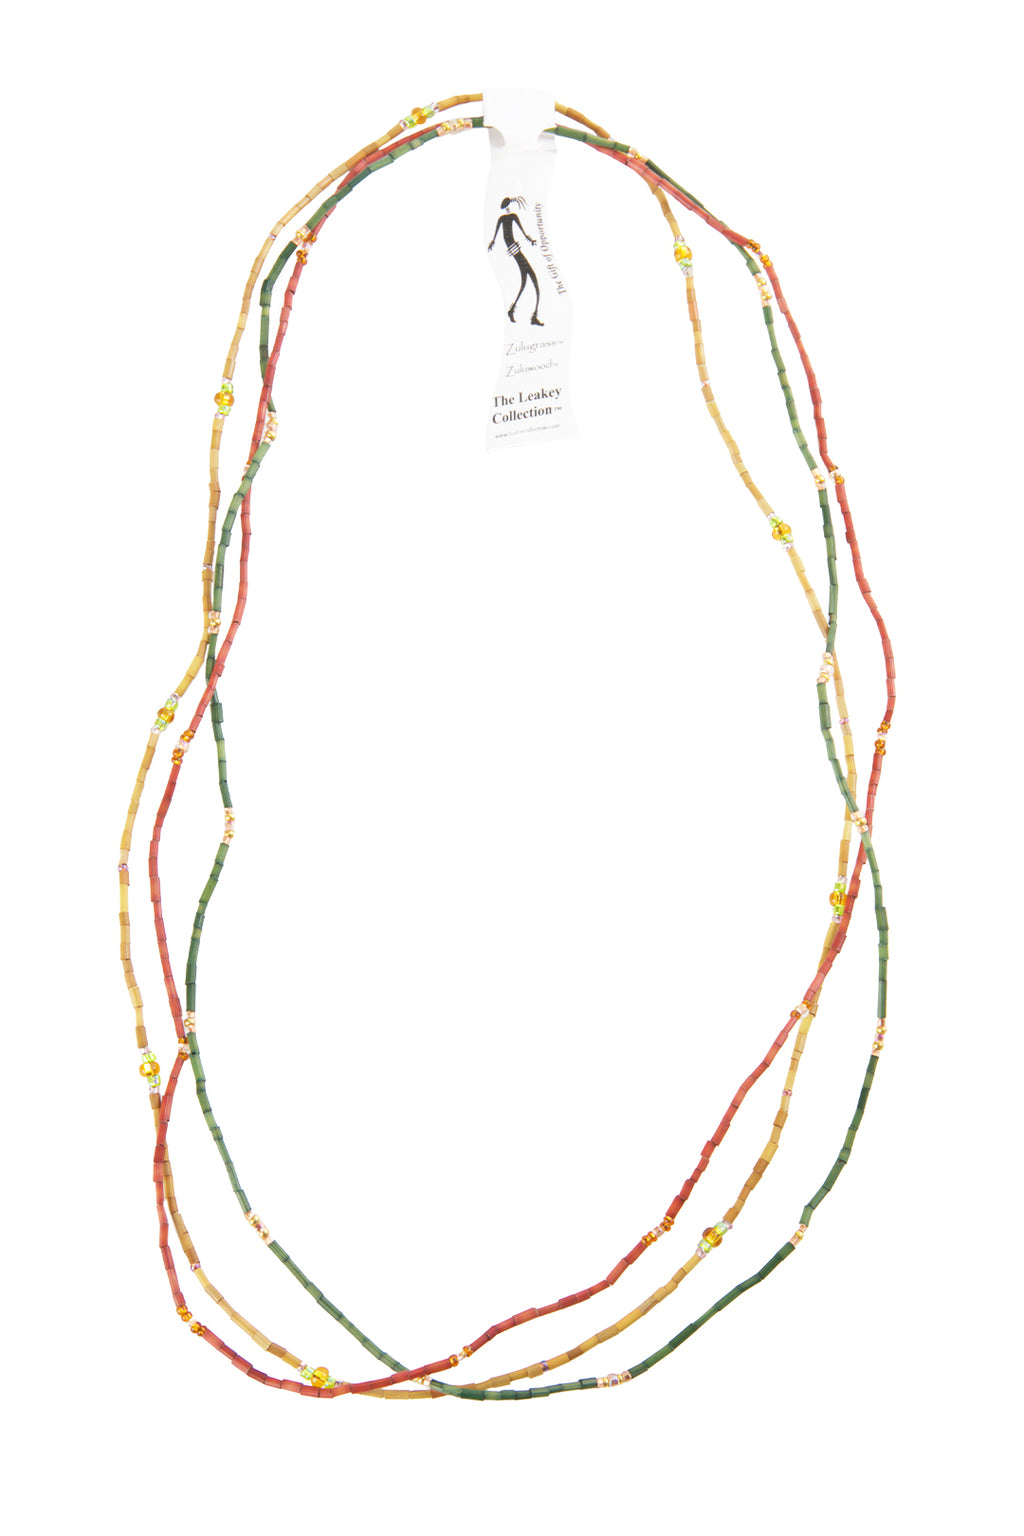 The Leakey Collection Set of 3 Zulugrass Single Strands - Forest